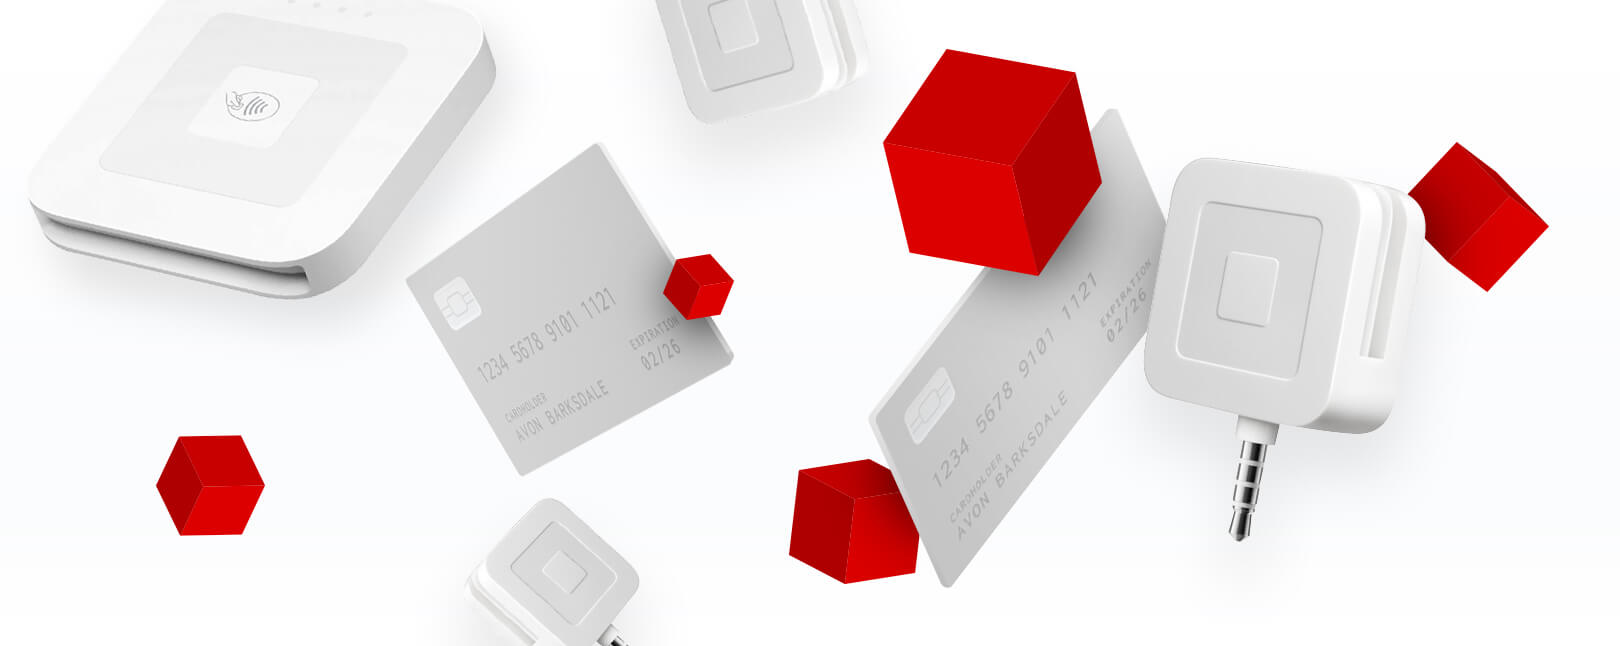 Square Chargeback